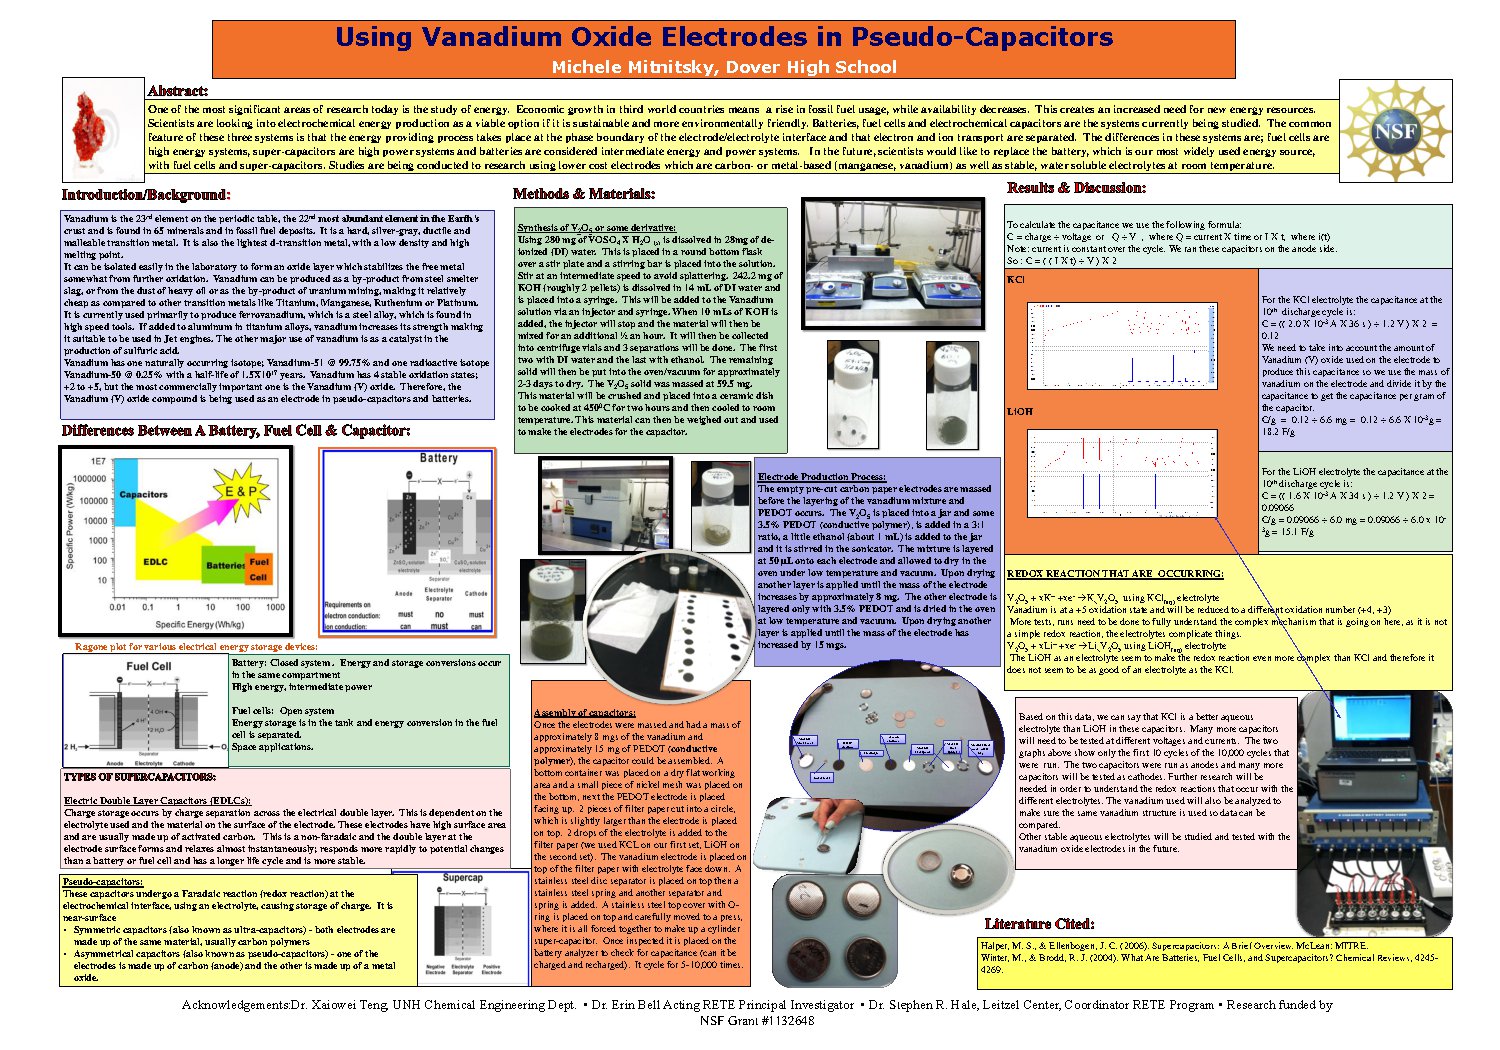 Using Vanadium Oxide Electrodes In Pseudo-Capacitors by srhale